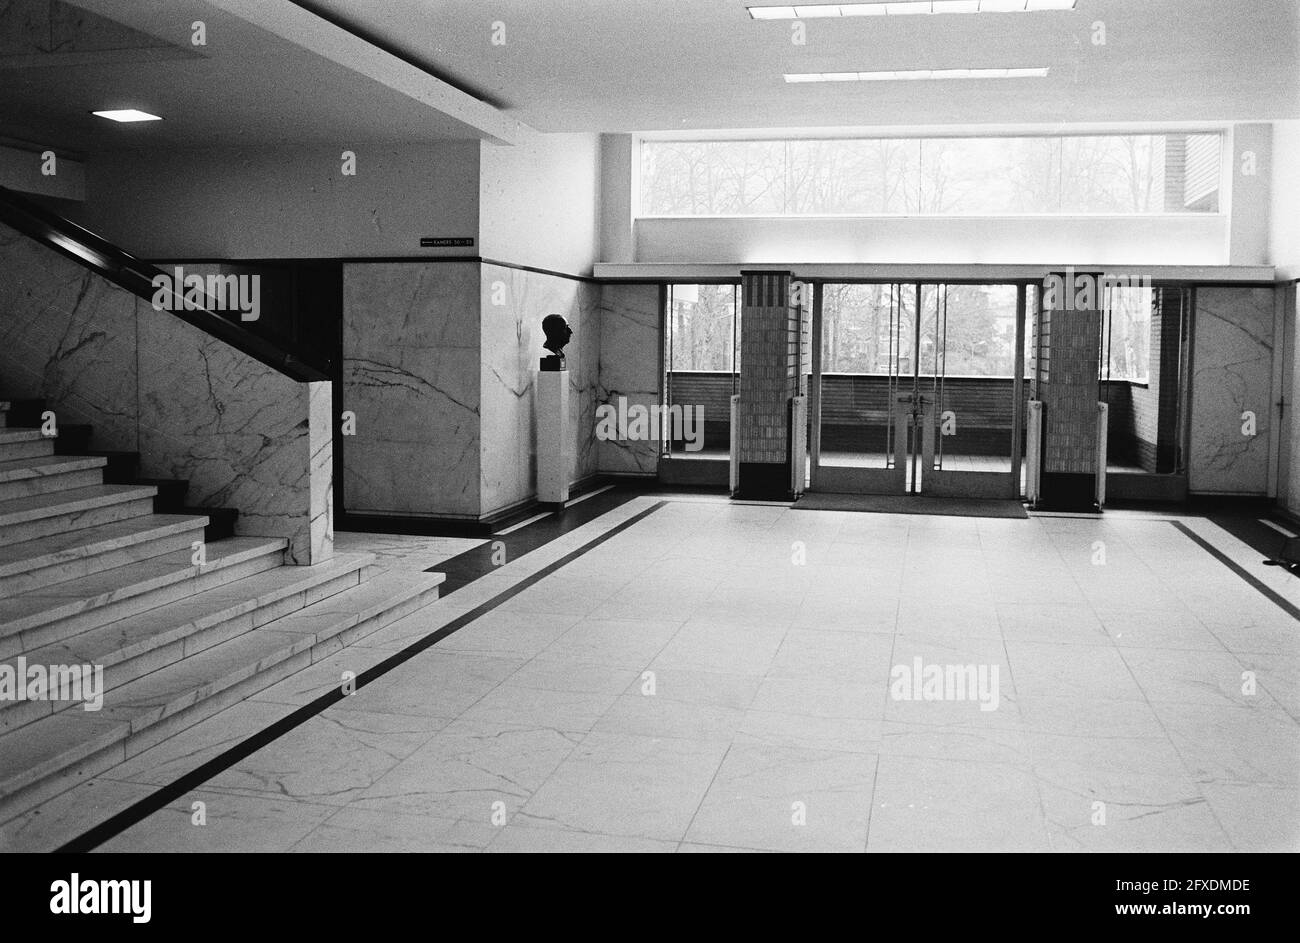 Town Hall in Hilversum by architect W.M. Dudok, interior, December 6, 1974, architecture, buildings, town halls, staircases, The Netherlands, 20th century press agency photo, news to remember, documentary, historic photography 1945-1990, visual stories, human history of the Twentieth Century, capturing moments in time Stock Photo